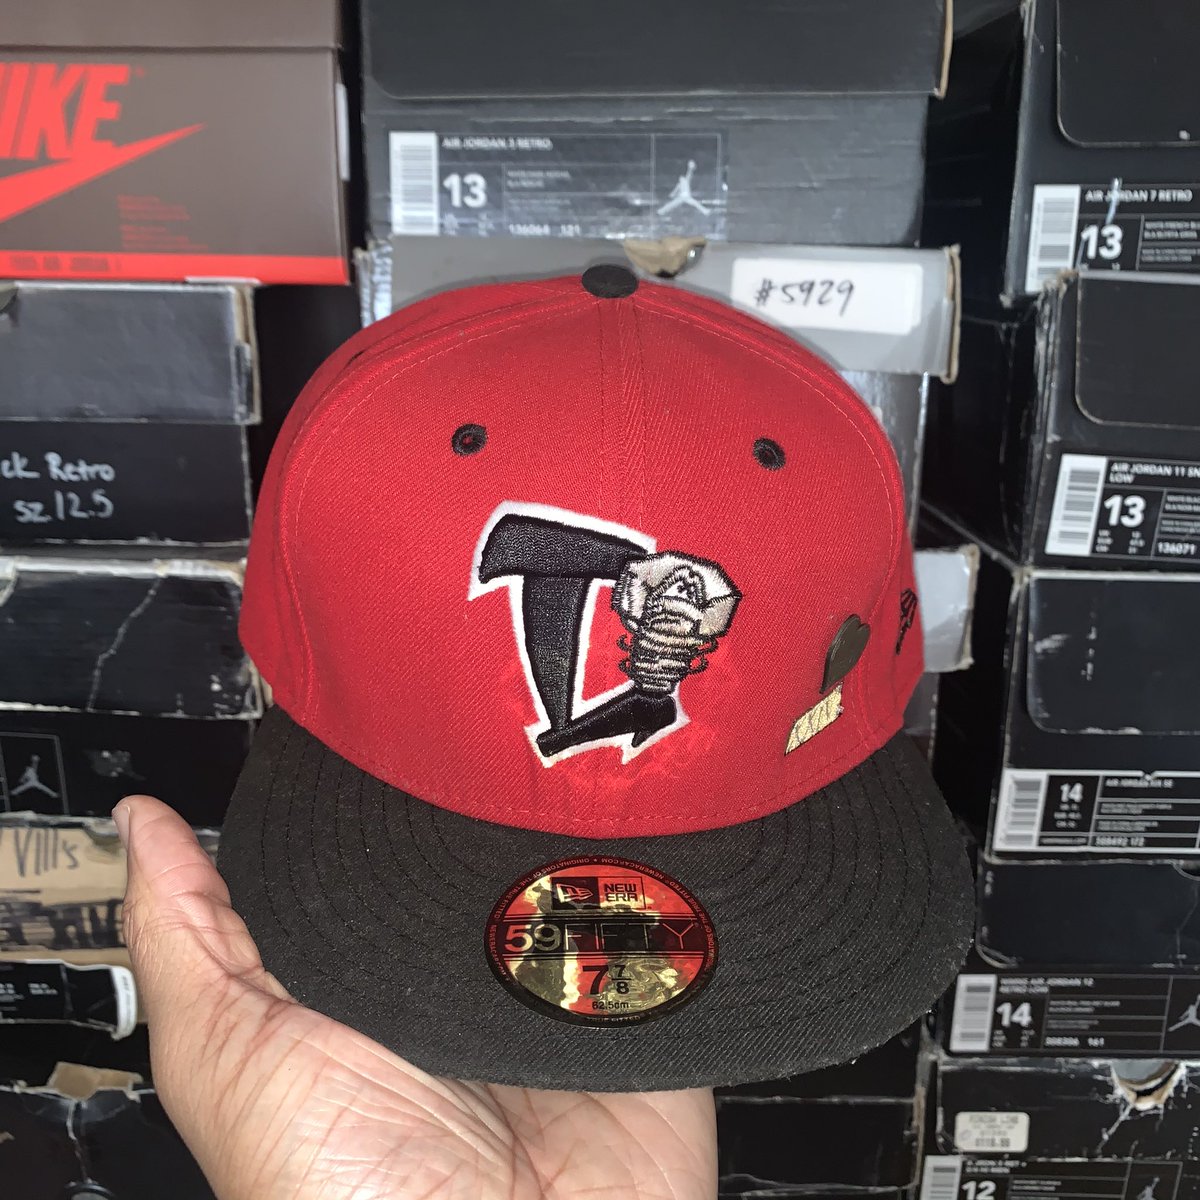 And last but not least, the  @HeartOfXXiV x  @LansingLugnuts collaboration, profits went to local city school programs, my absolute favorite Lugnuts fitteds of them all. Good people. Good cause. Great hat